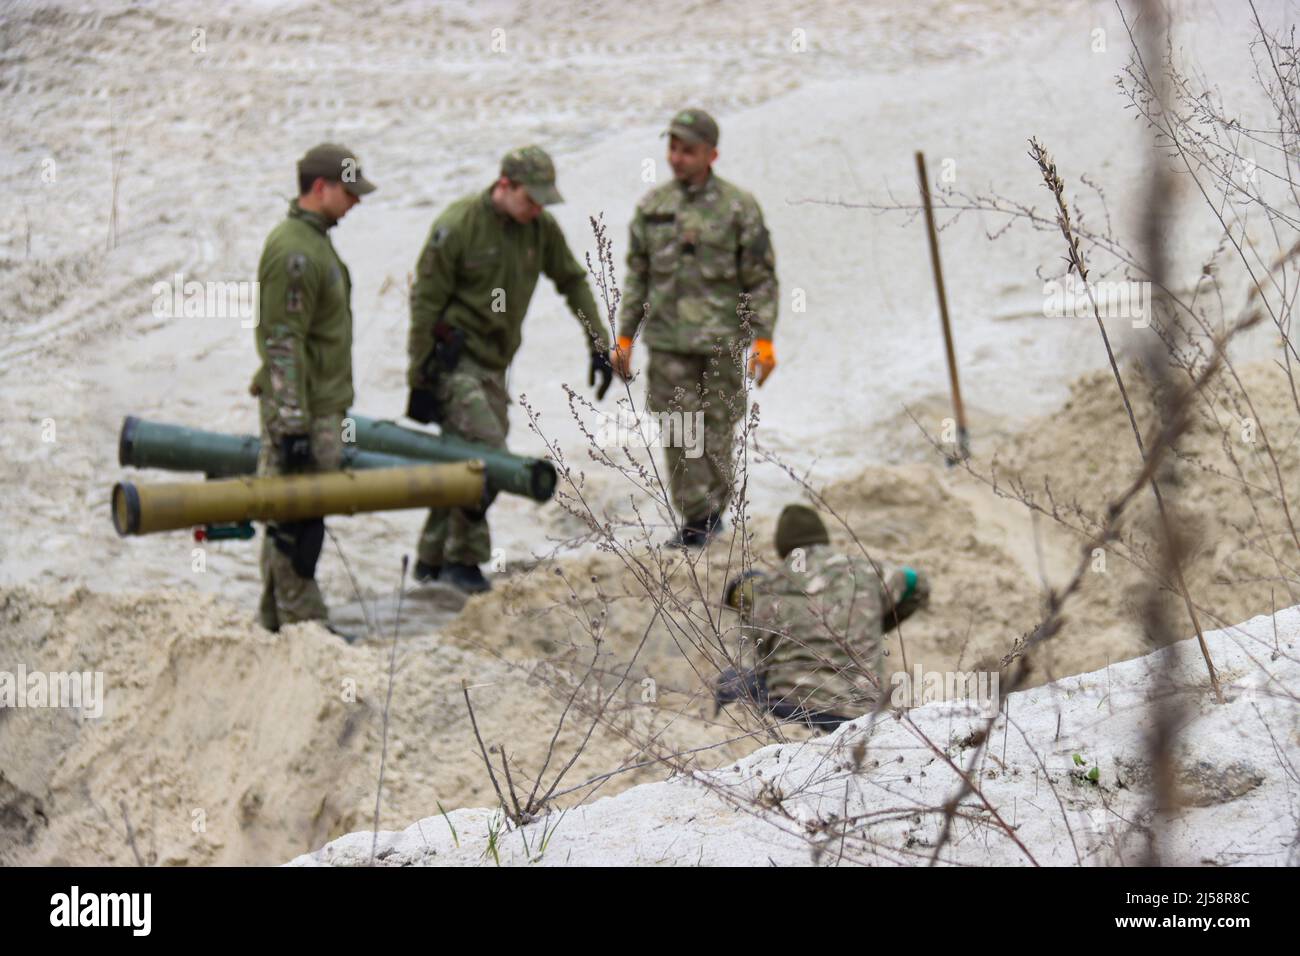 KYIV REGION, UKRAINE - APRIL 20, 2022 - Servicemen arrange the shells in a trench as they work to dispose of ammunition collected in the territories l Stock Photo